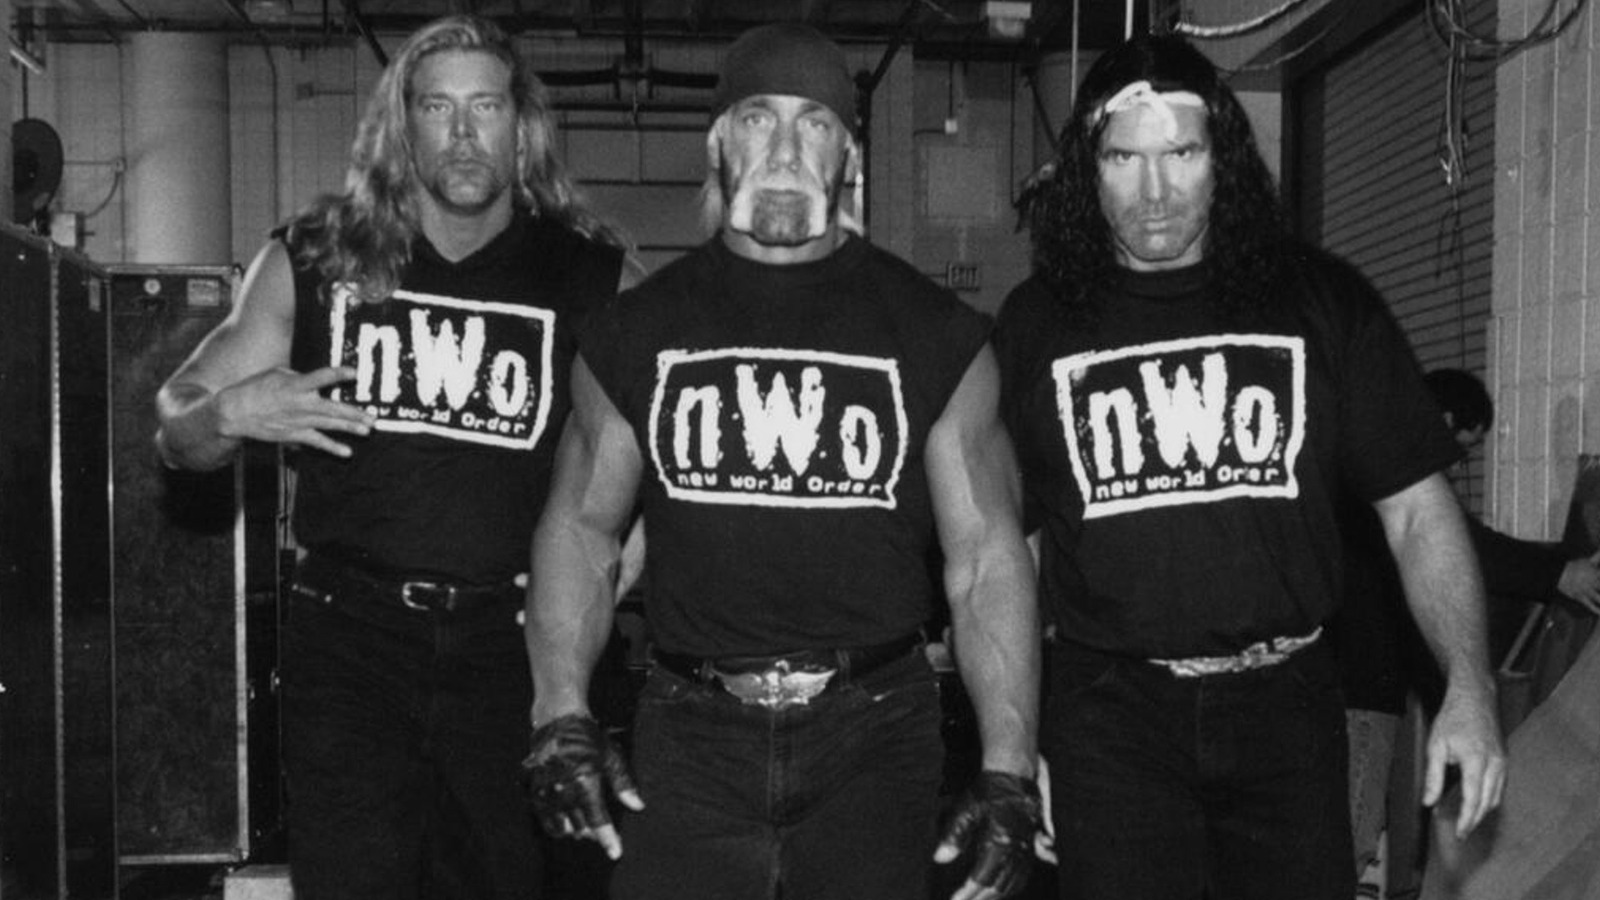 Kevin Sullivan Speculates On How Long WCW Would Have Lasted Without New World Order